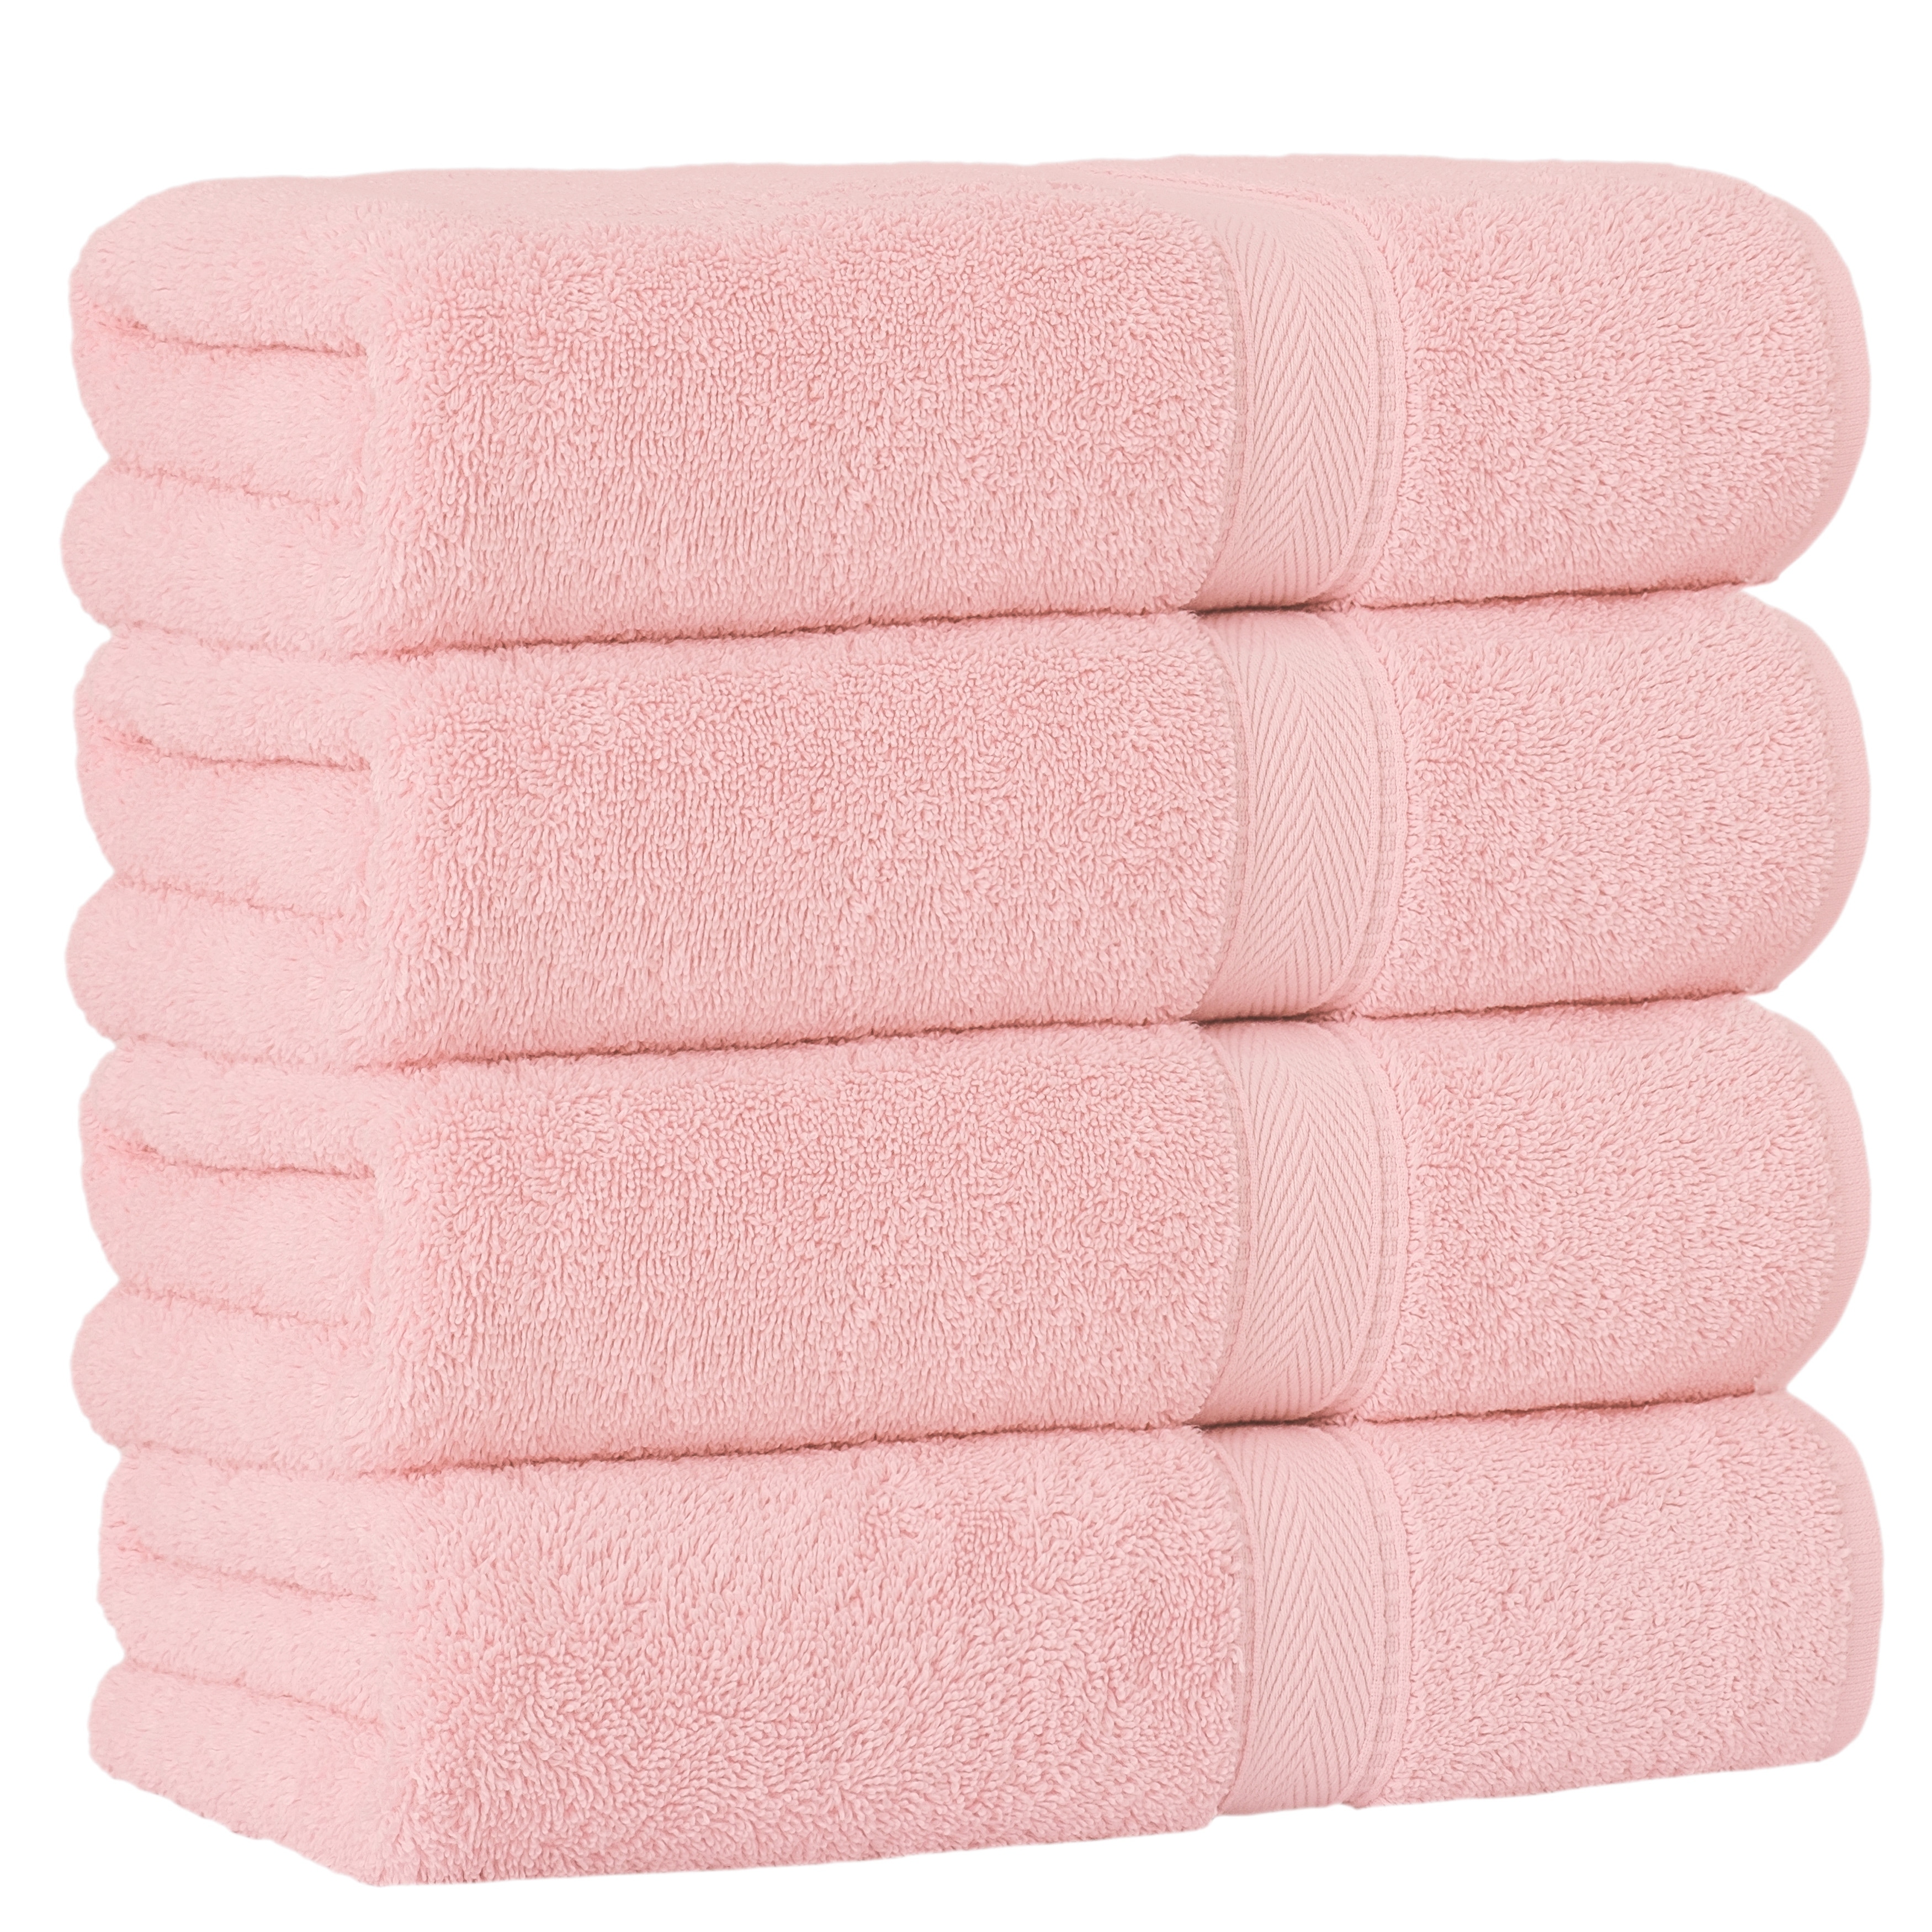 https://ak1.ostkcdn.com/images/products/is/images/direct/5547e5416753c0037d7eee9308bdb467d2cc4a03/Authentic-Hotel-and-Spa-Turkish-Cotton-Bath-Towels-%28Set-of-4%29.jpg